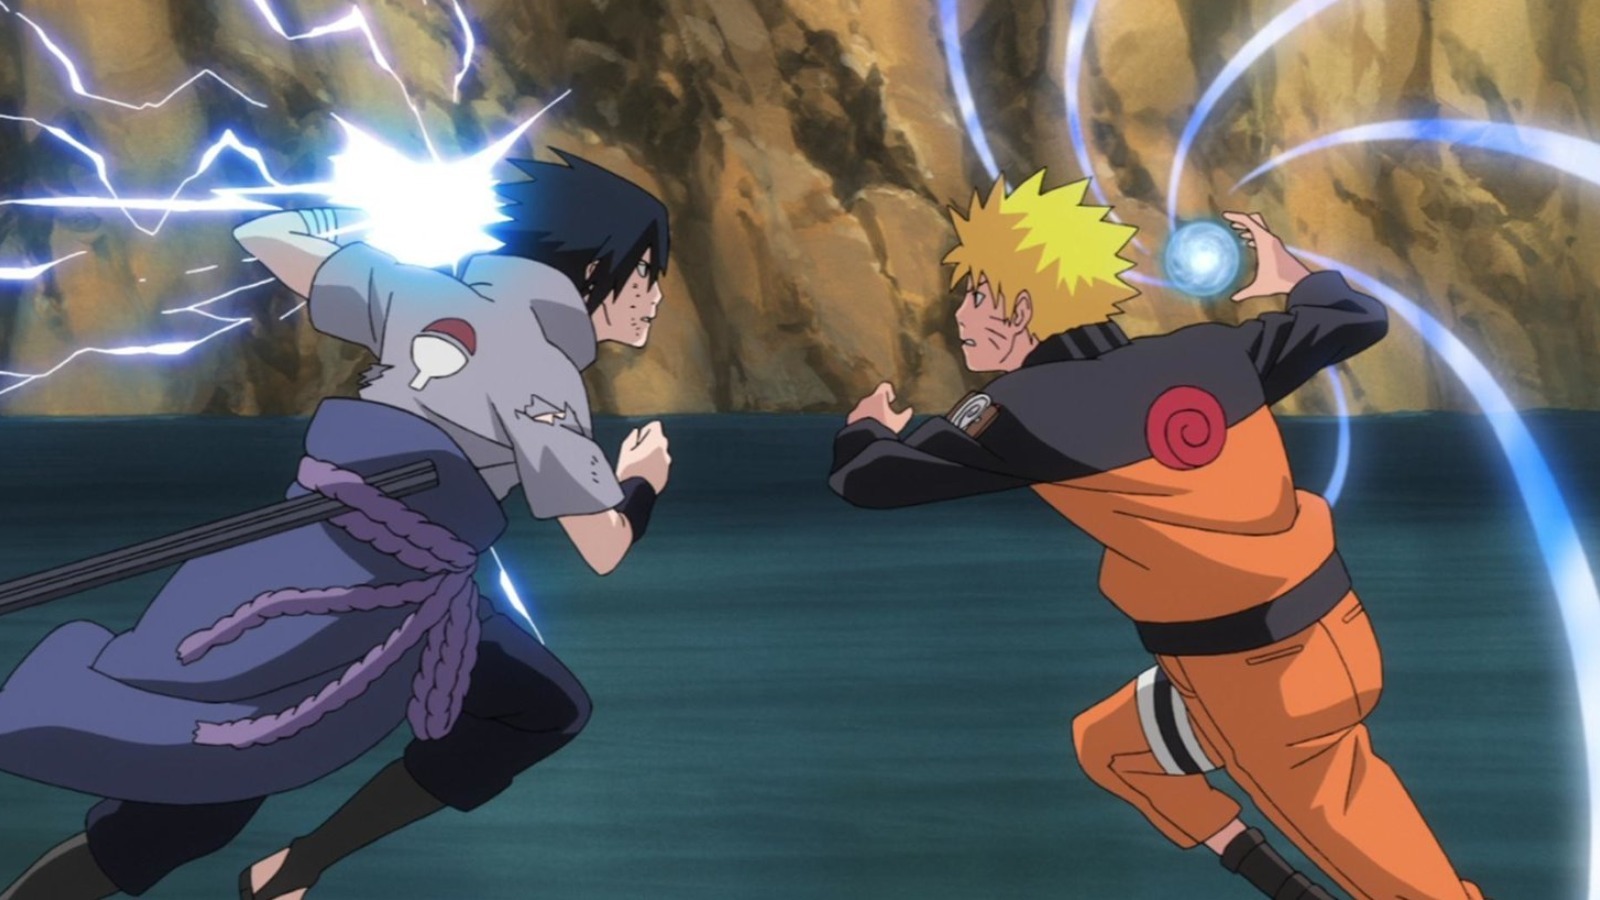 Why The Action In Naruto Looks So Good